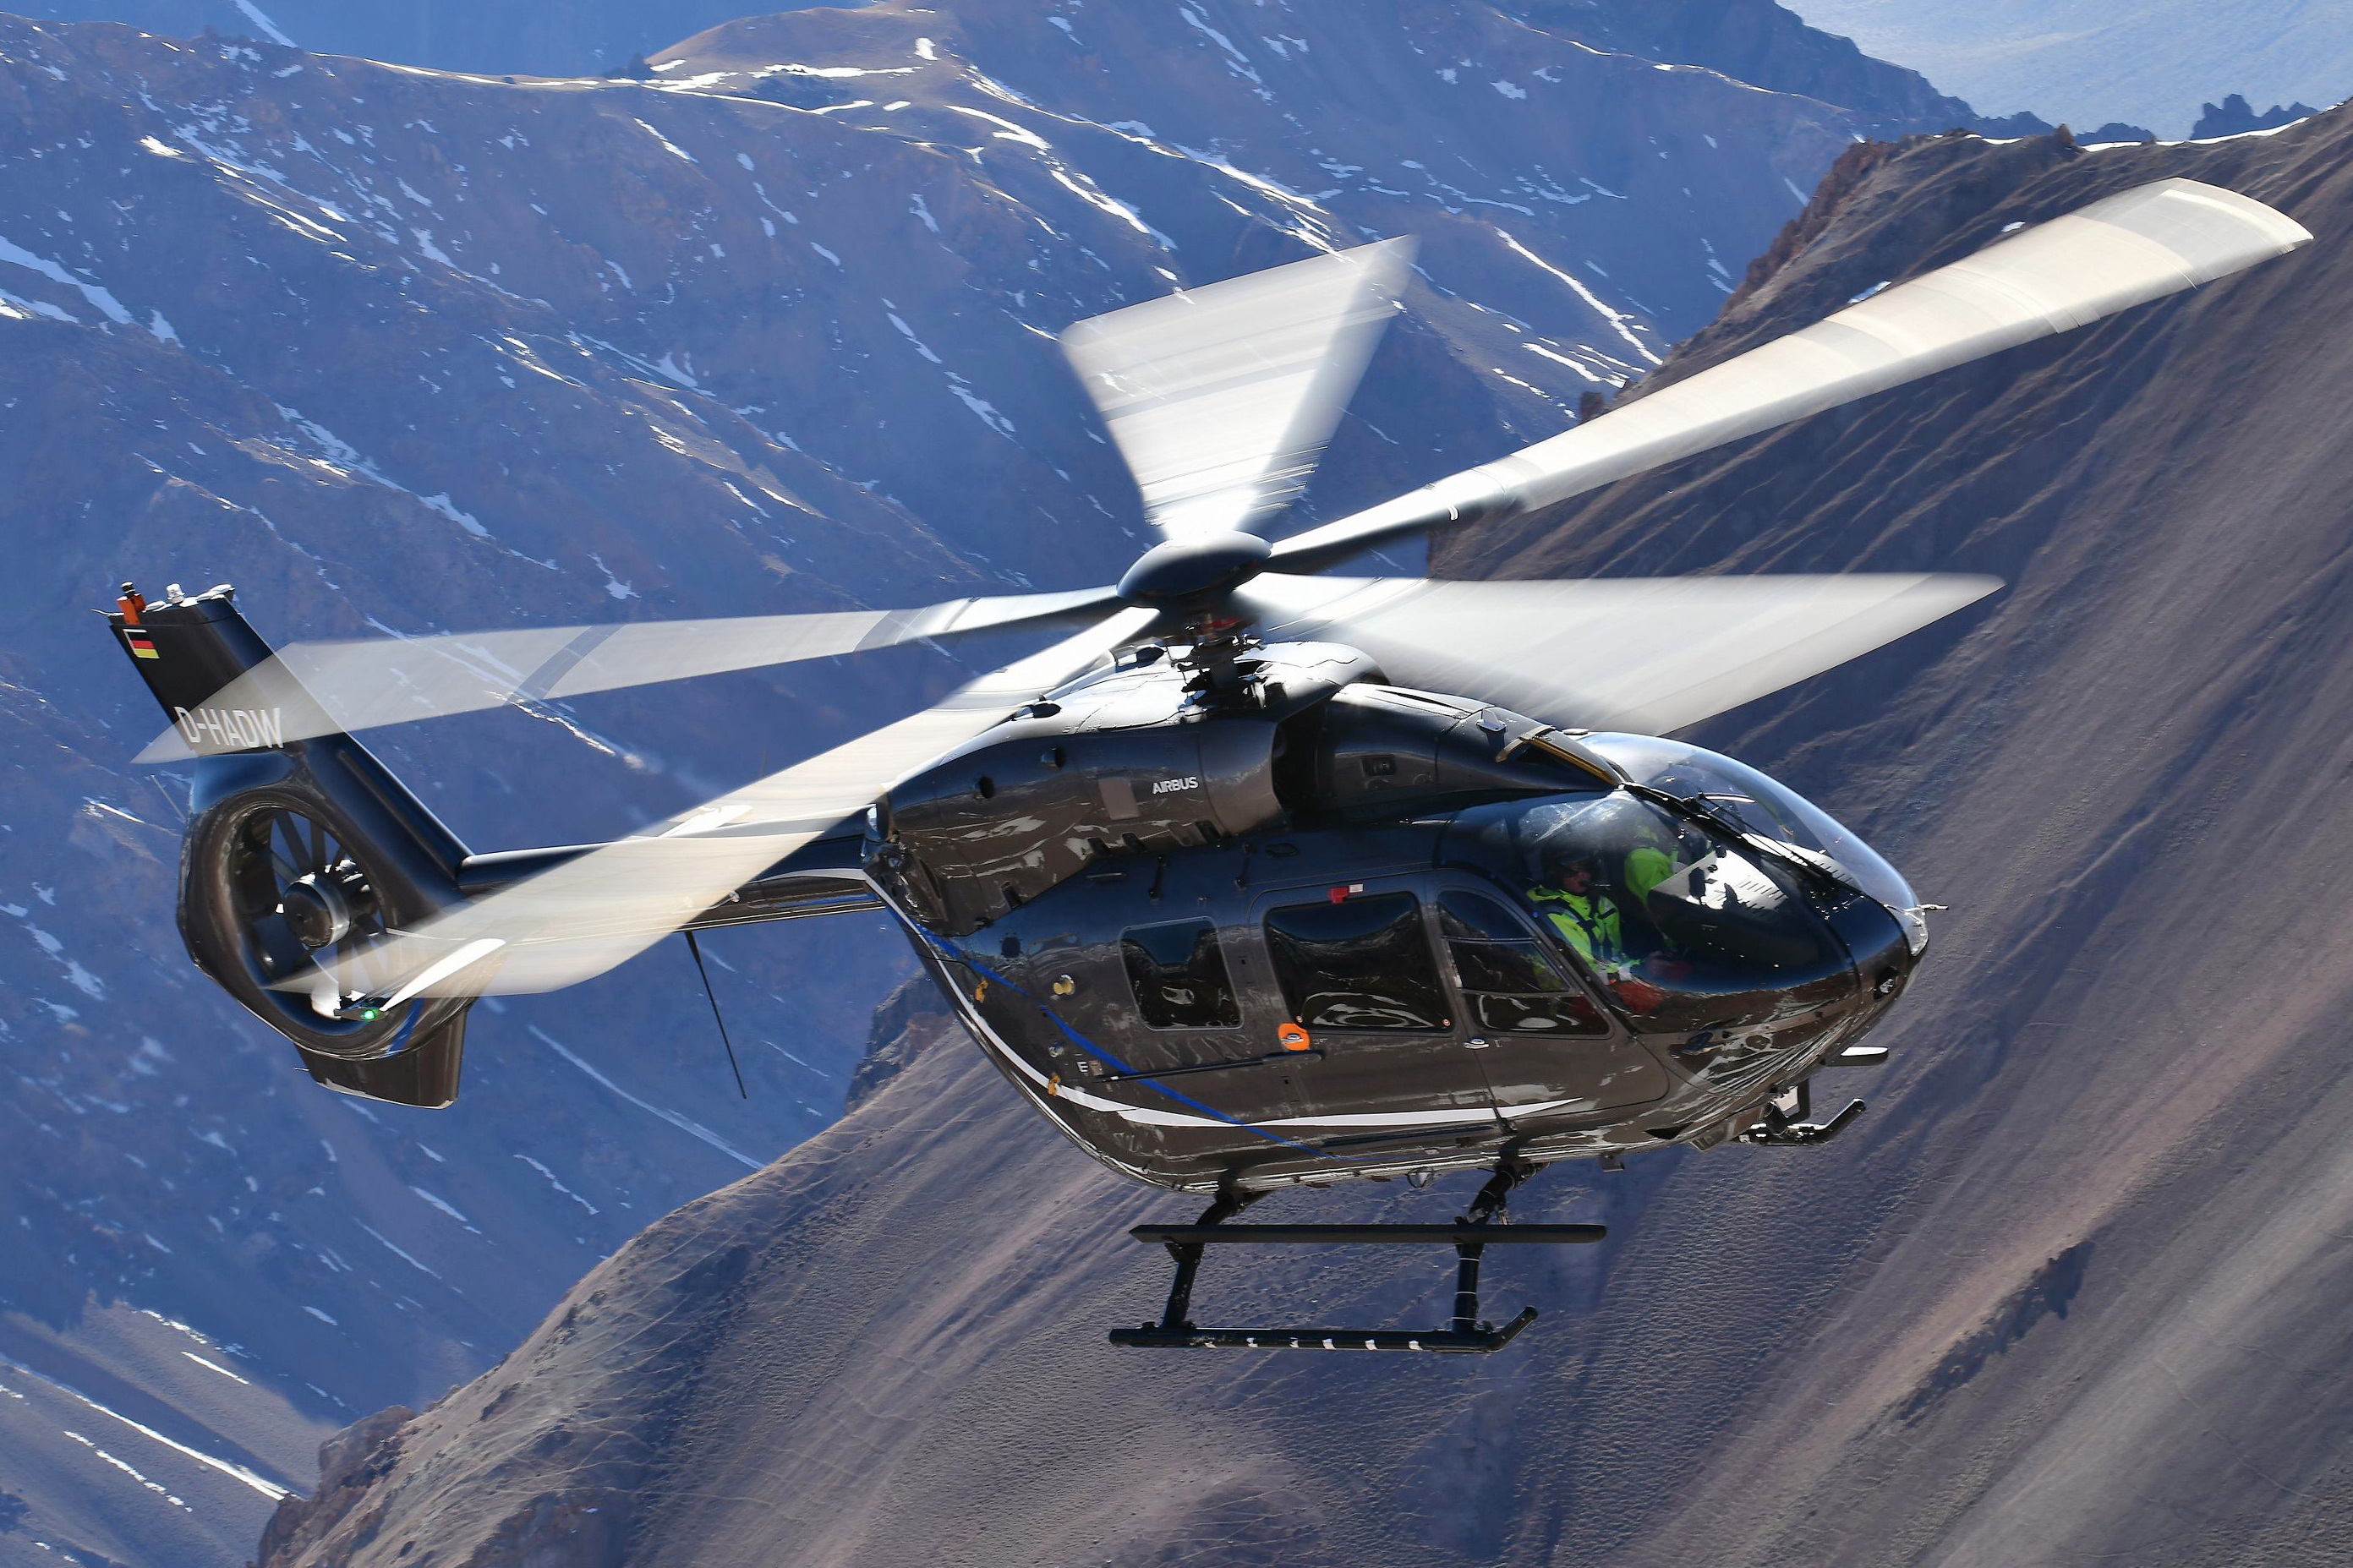 Airbus Helicopters’ five-blade H145 has been certified by the European Union Aviation Safety Agency (EASA), clearing the way for customer deliveries towards the end of summer 2020. Click to enlarge.